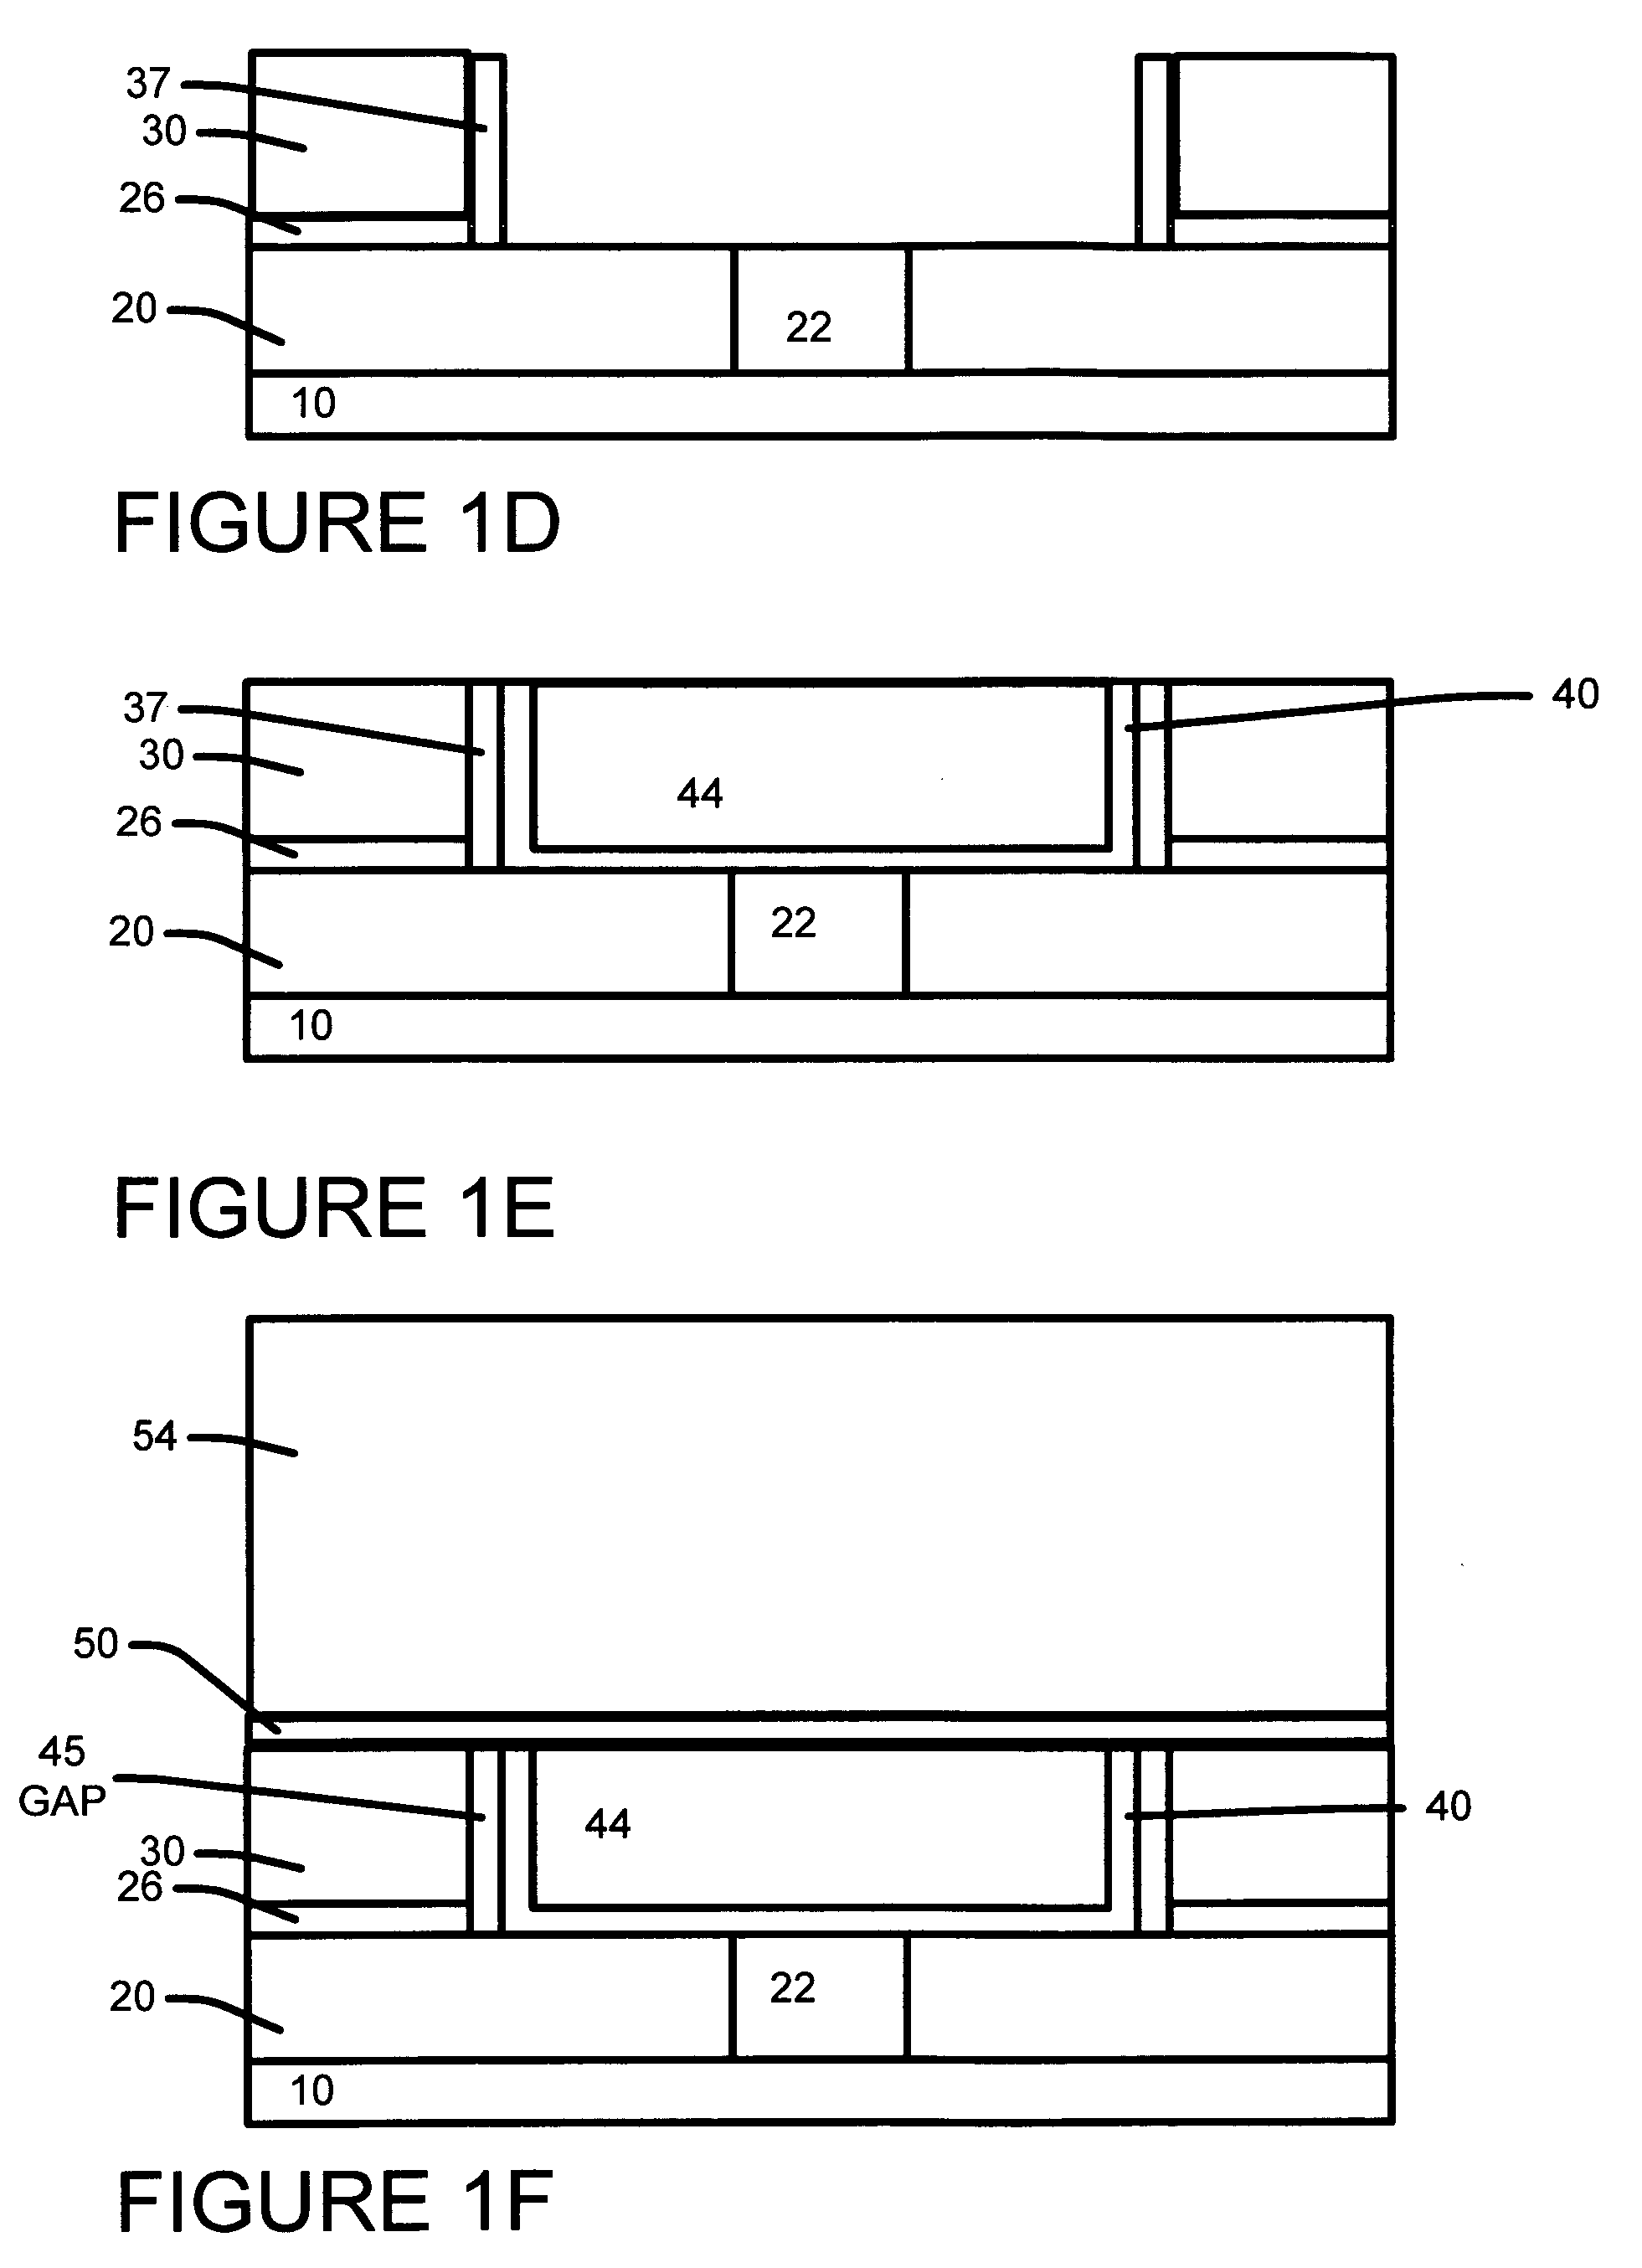 Structure and method of liner air gap formation